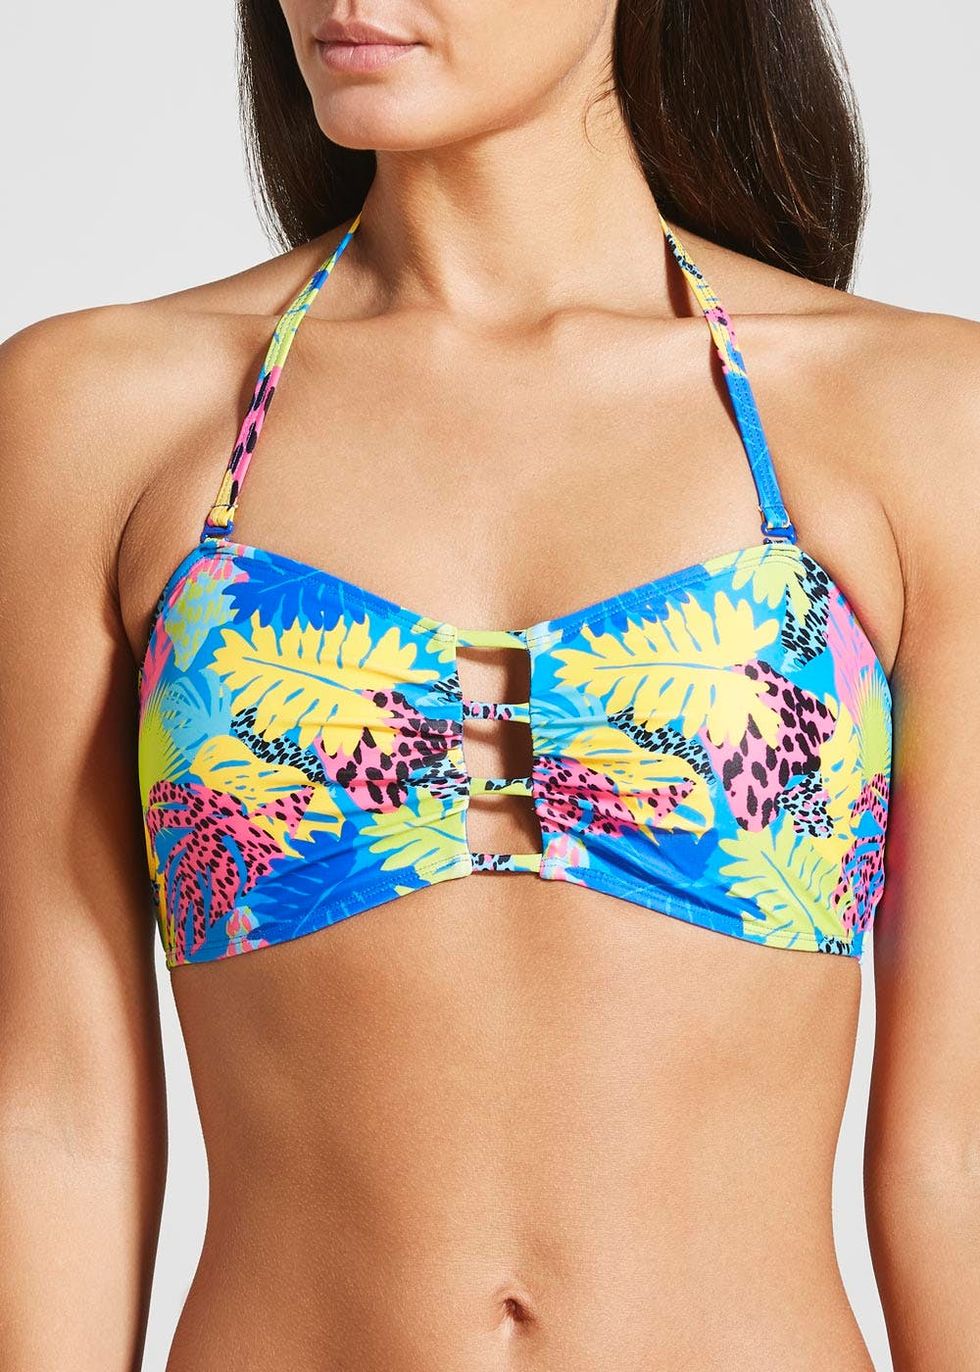 Matalan is selling matching mother and daughter swimwear